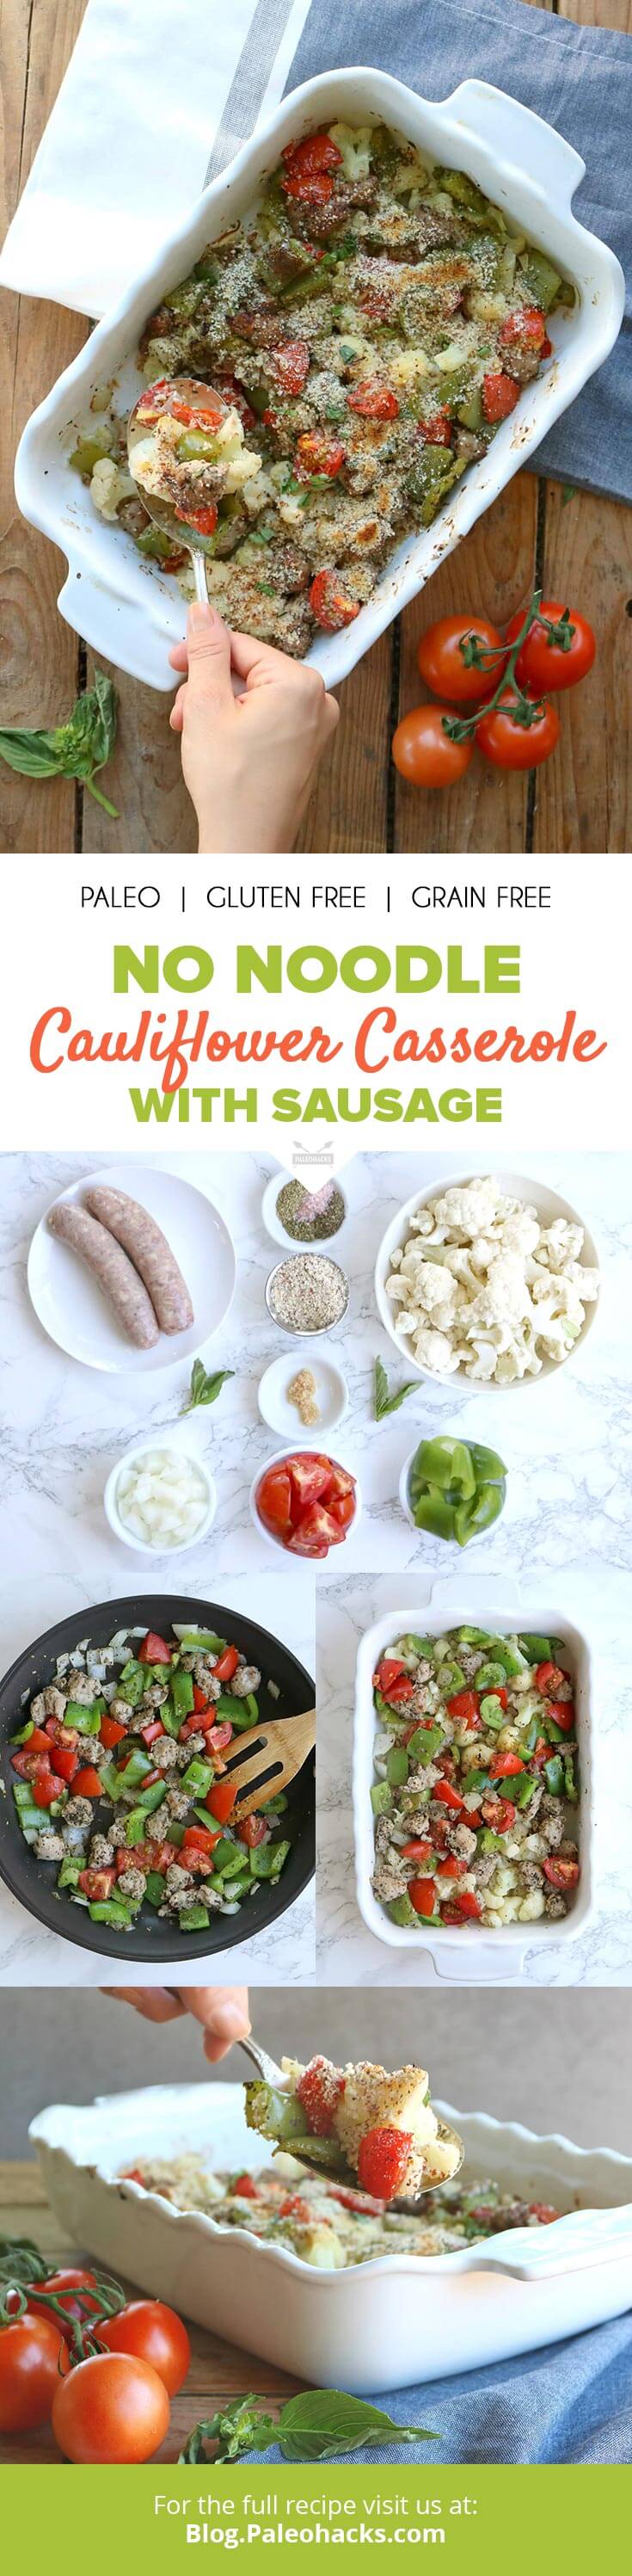 This flavorful, herb-packed Italian casserole is made from savory pork sausage and cauliflower for a stick-to-your-ribs meal.